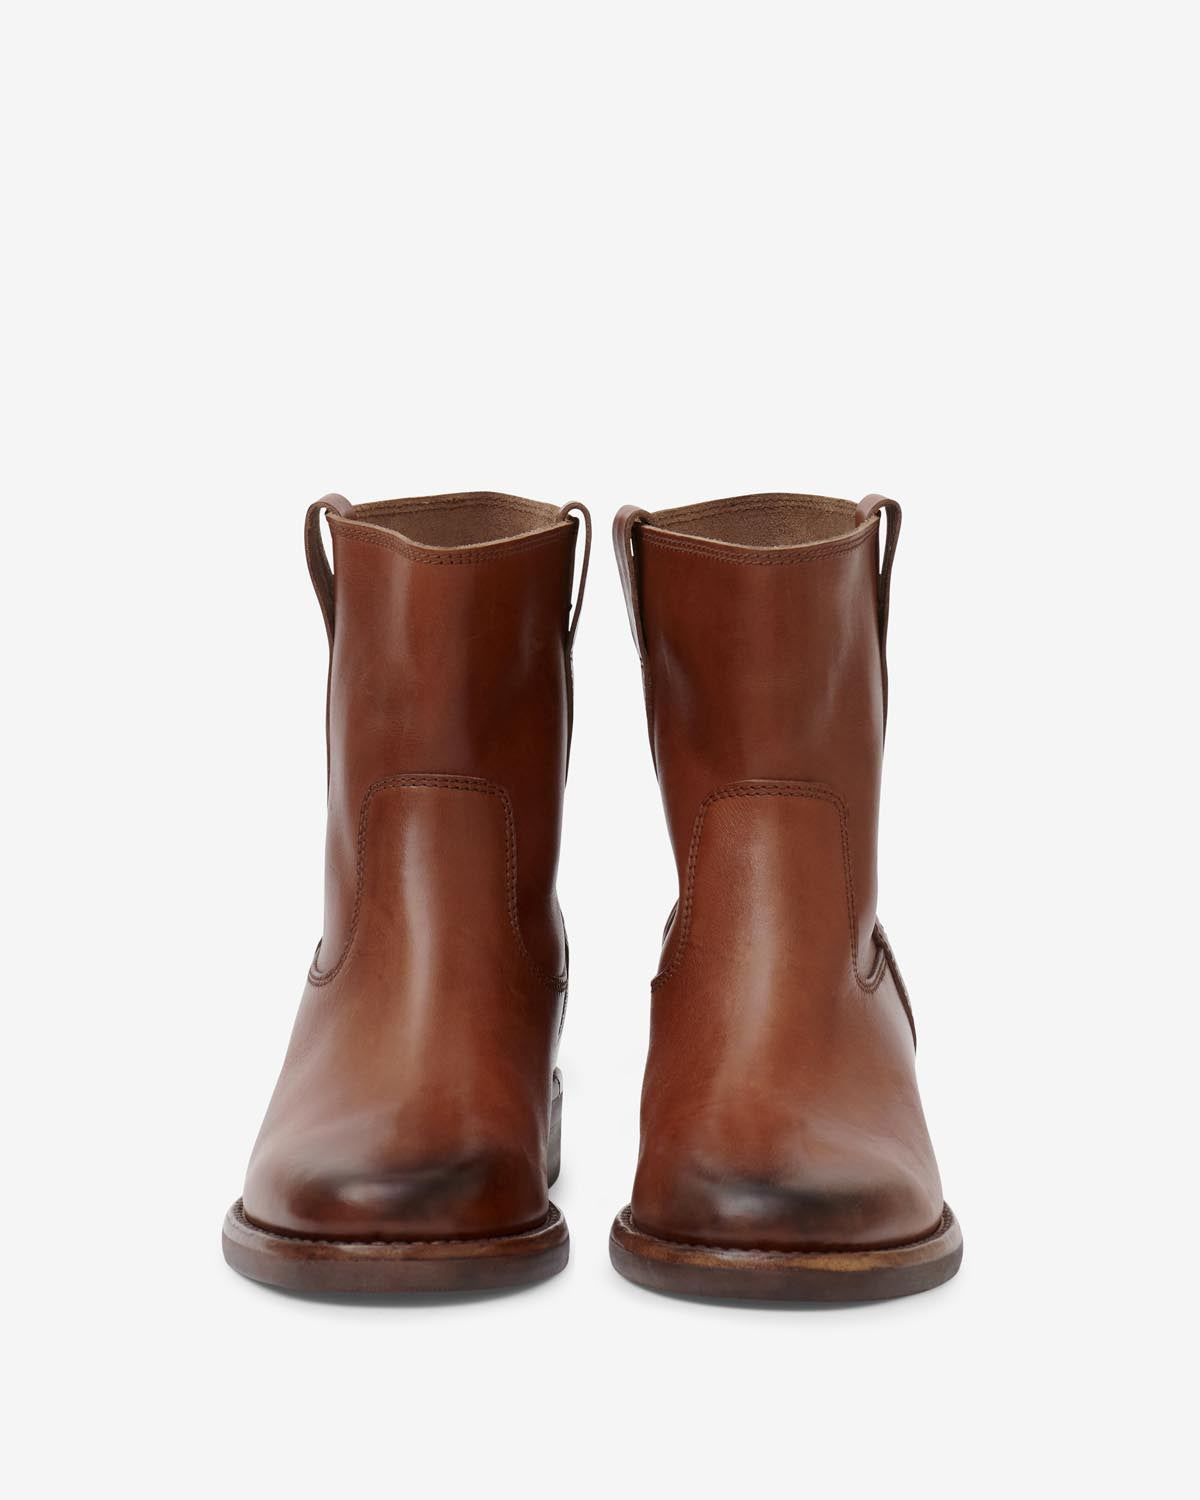 Boots susee Woman Cognac 4